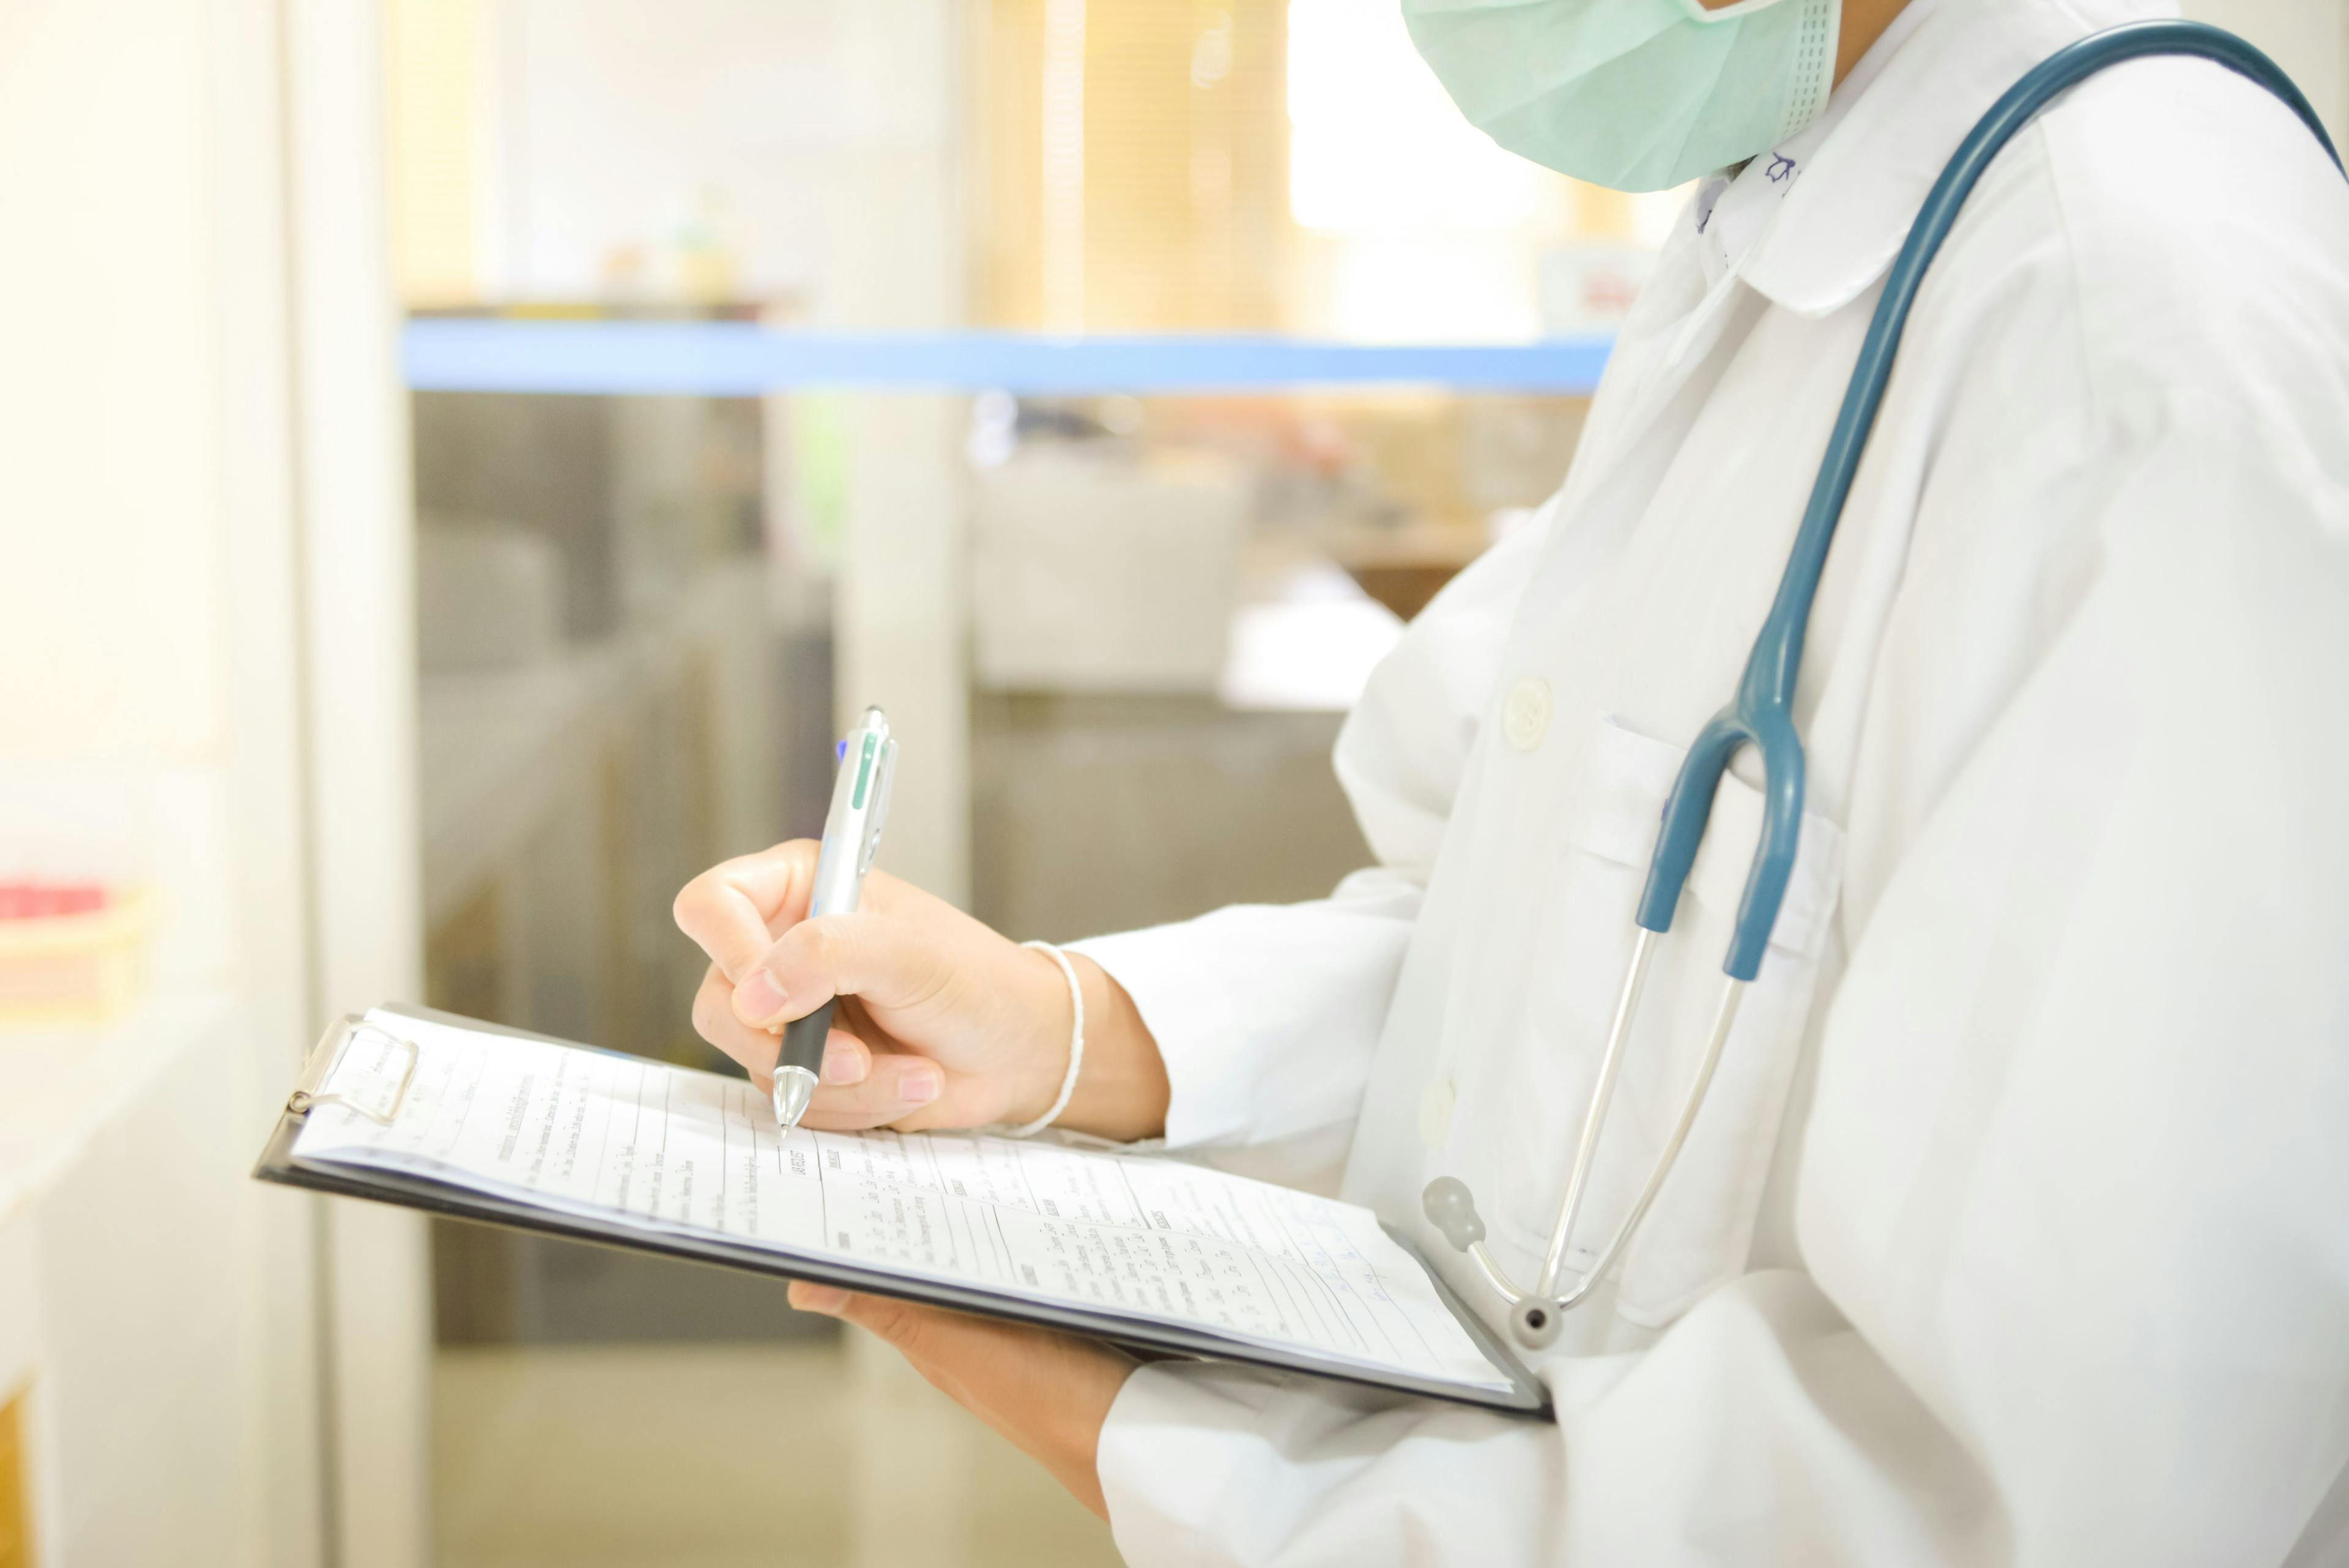 Clinician Taking Notes on Clinical Trial Concept | image credit: toeytoey - stock.adobe.come